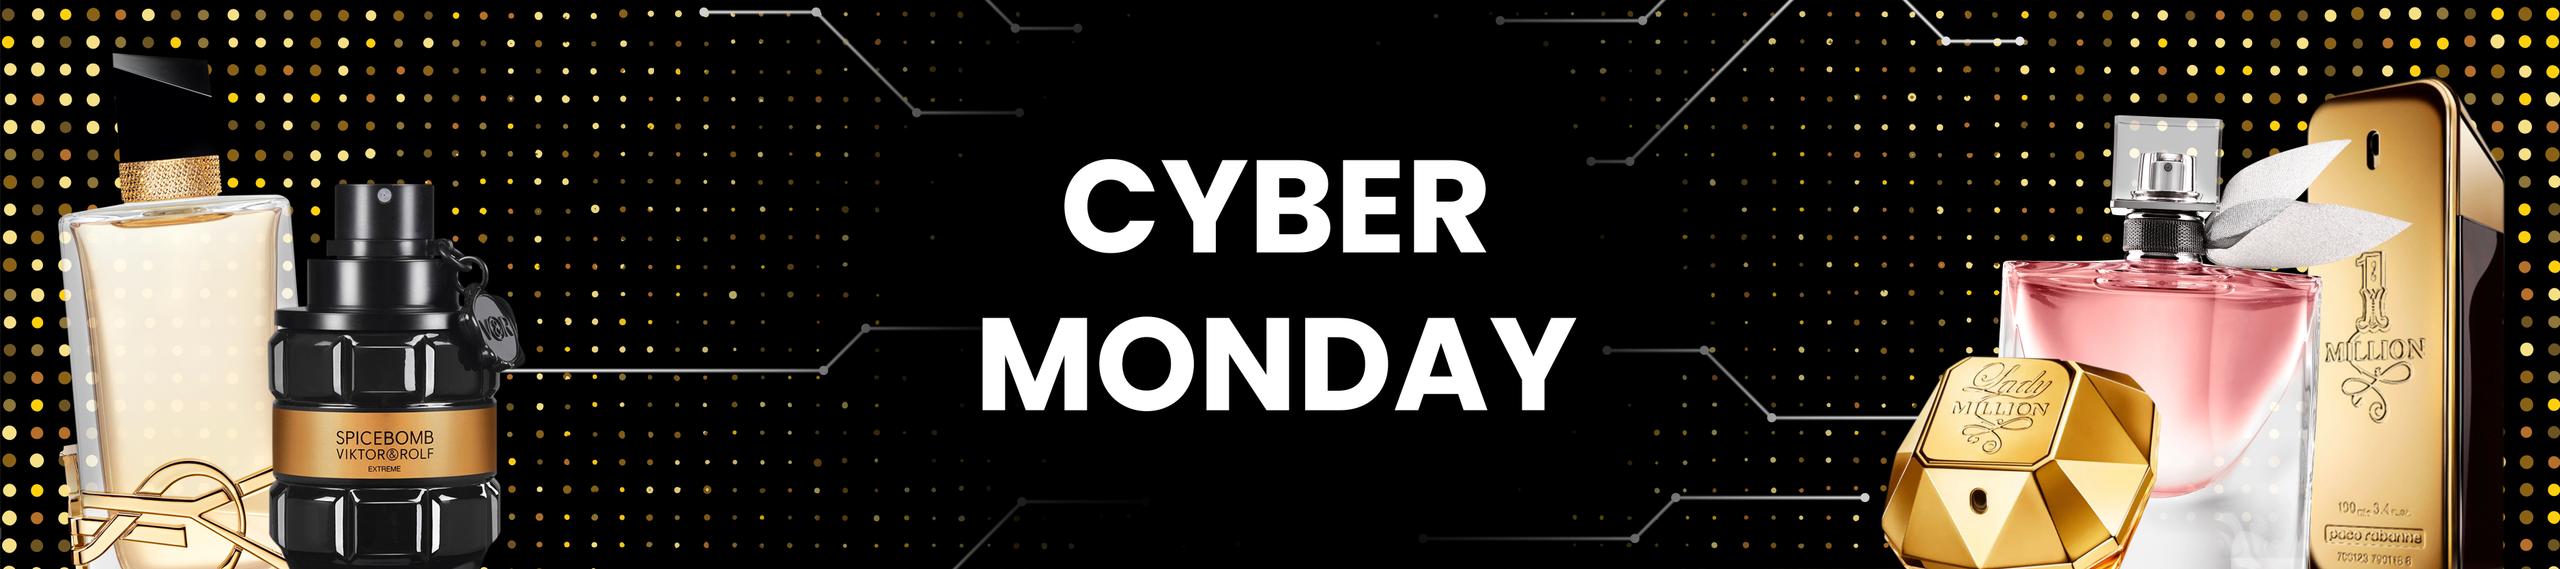 Cyber Monday banner 